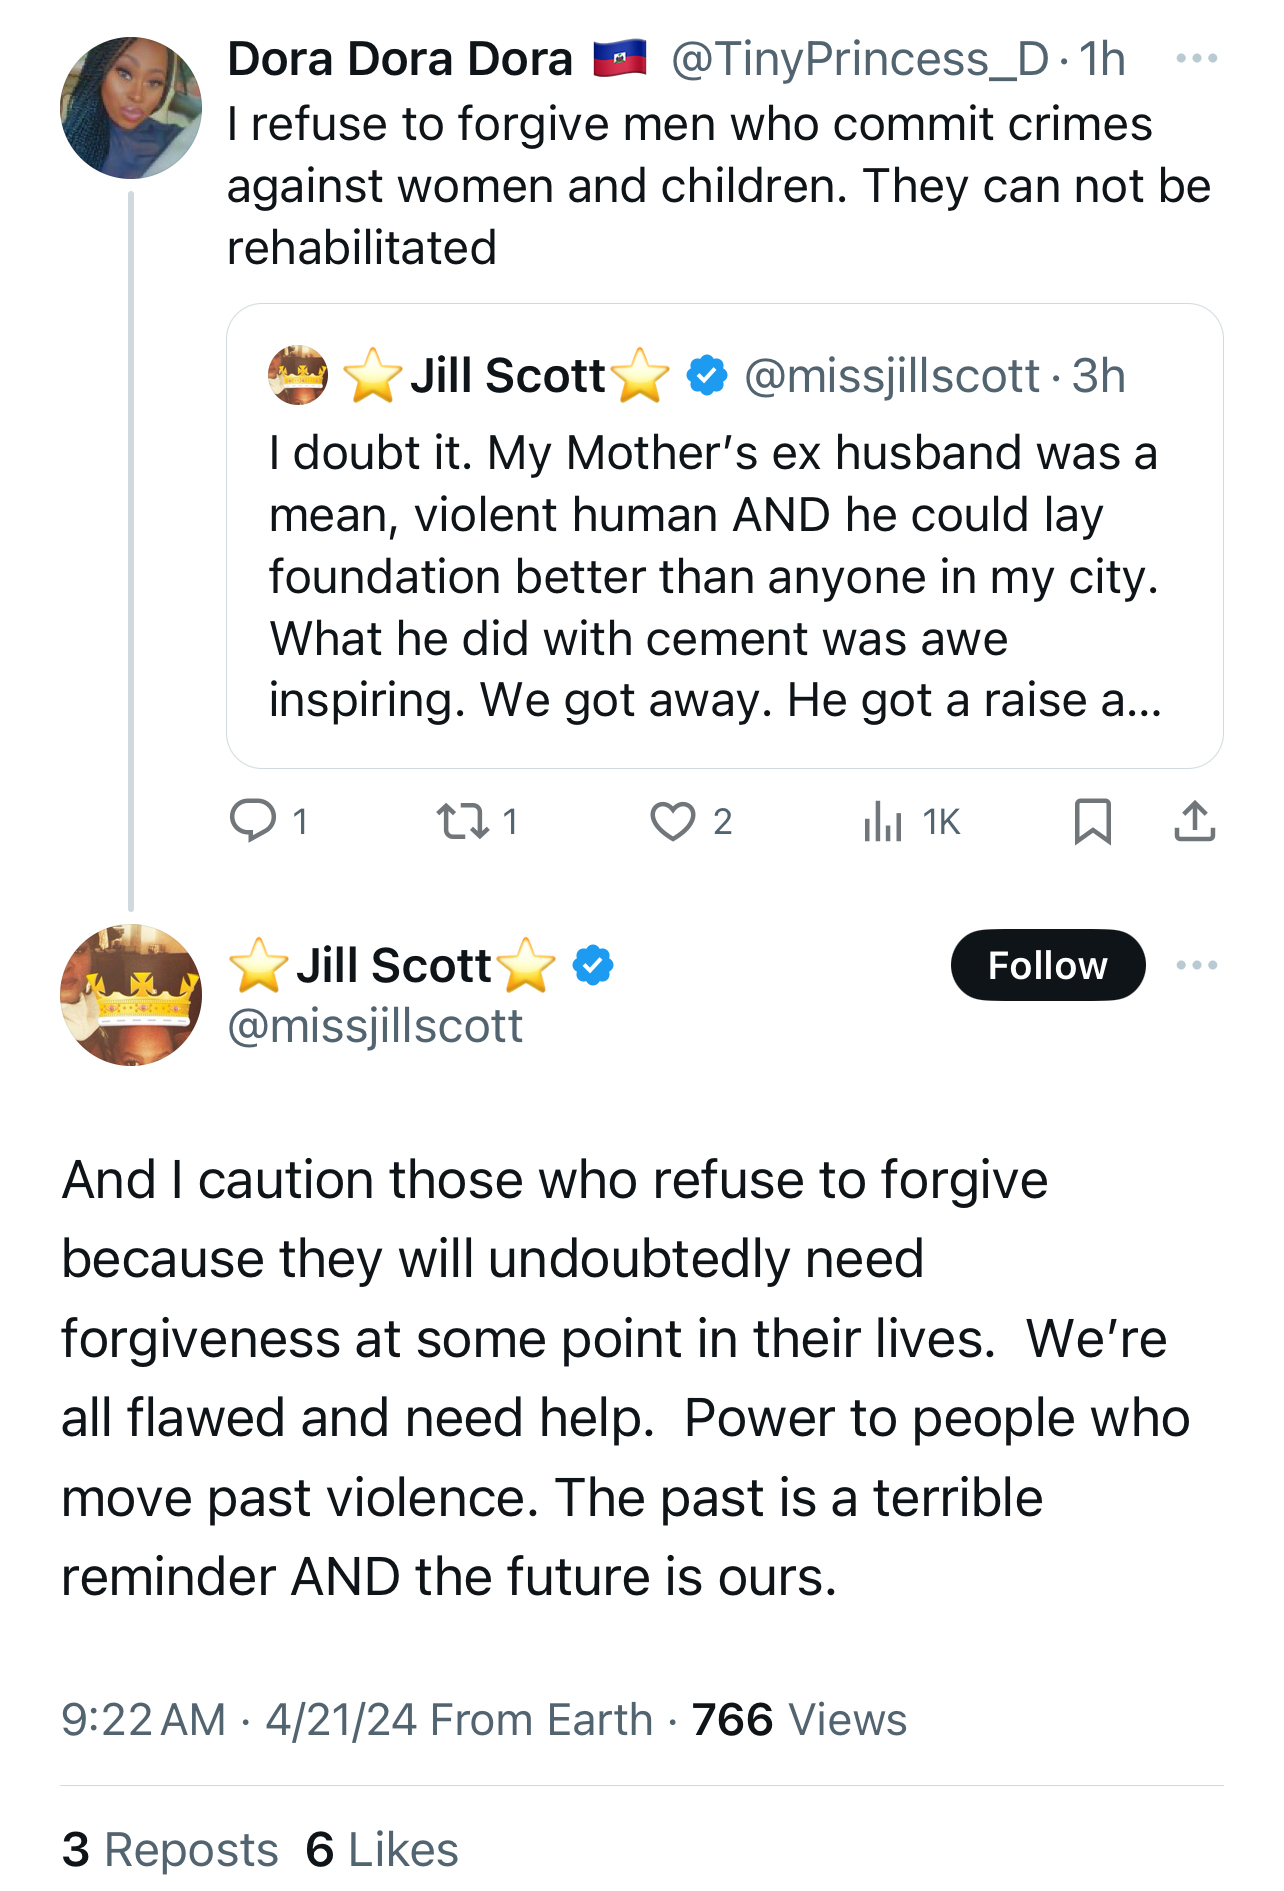 Summarized tweet exchange on forgiveness and past mistakes, highlighting personal growth and future change